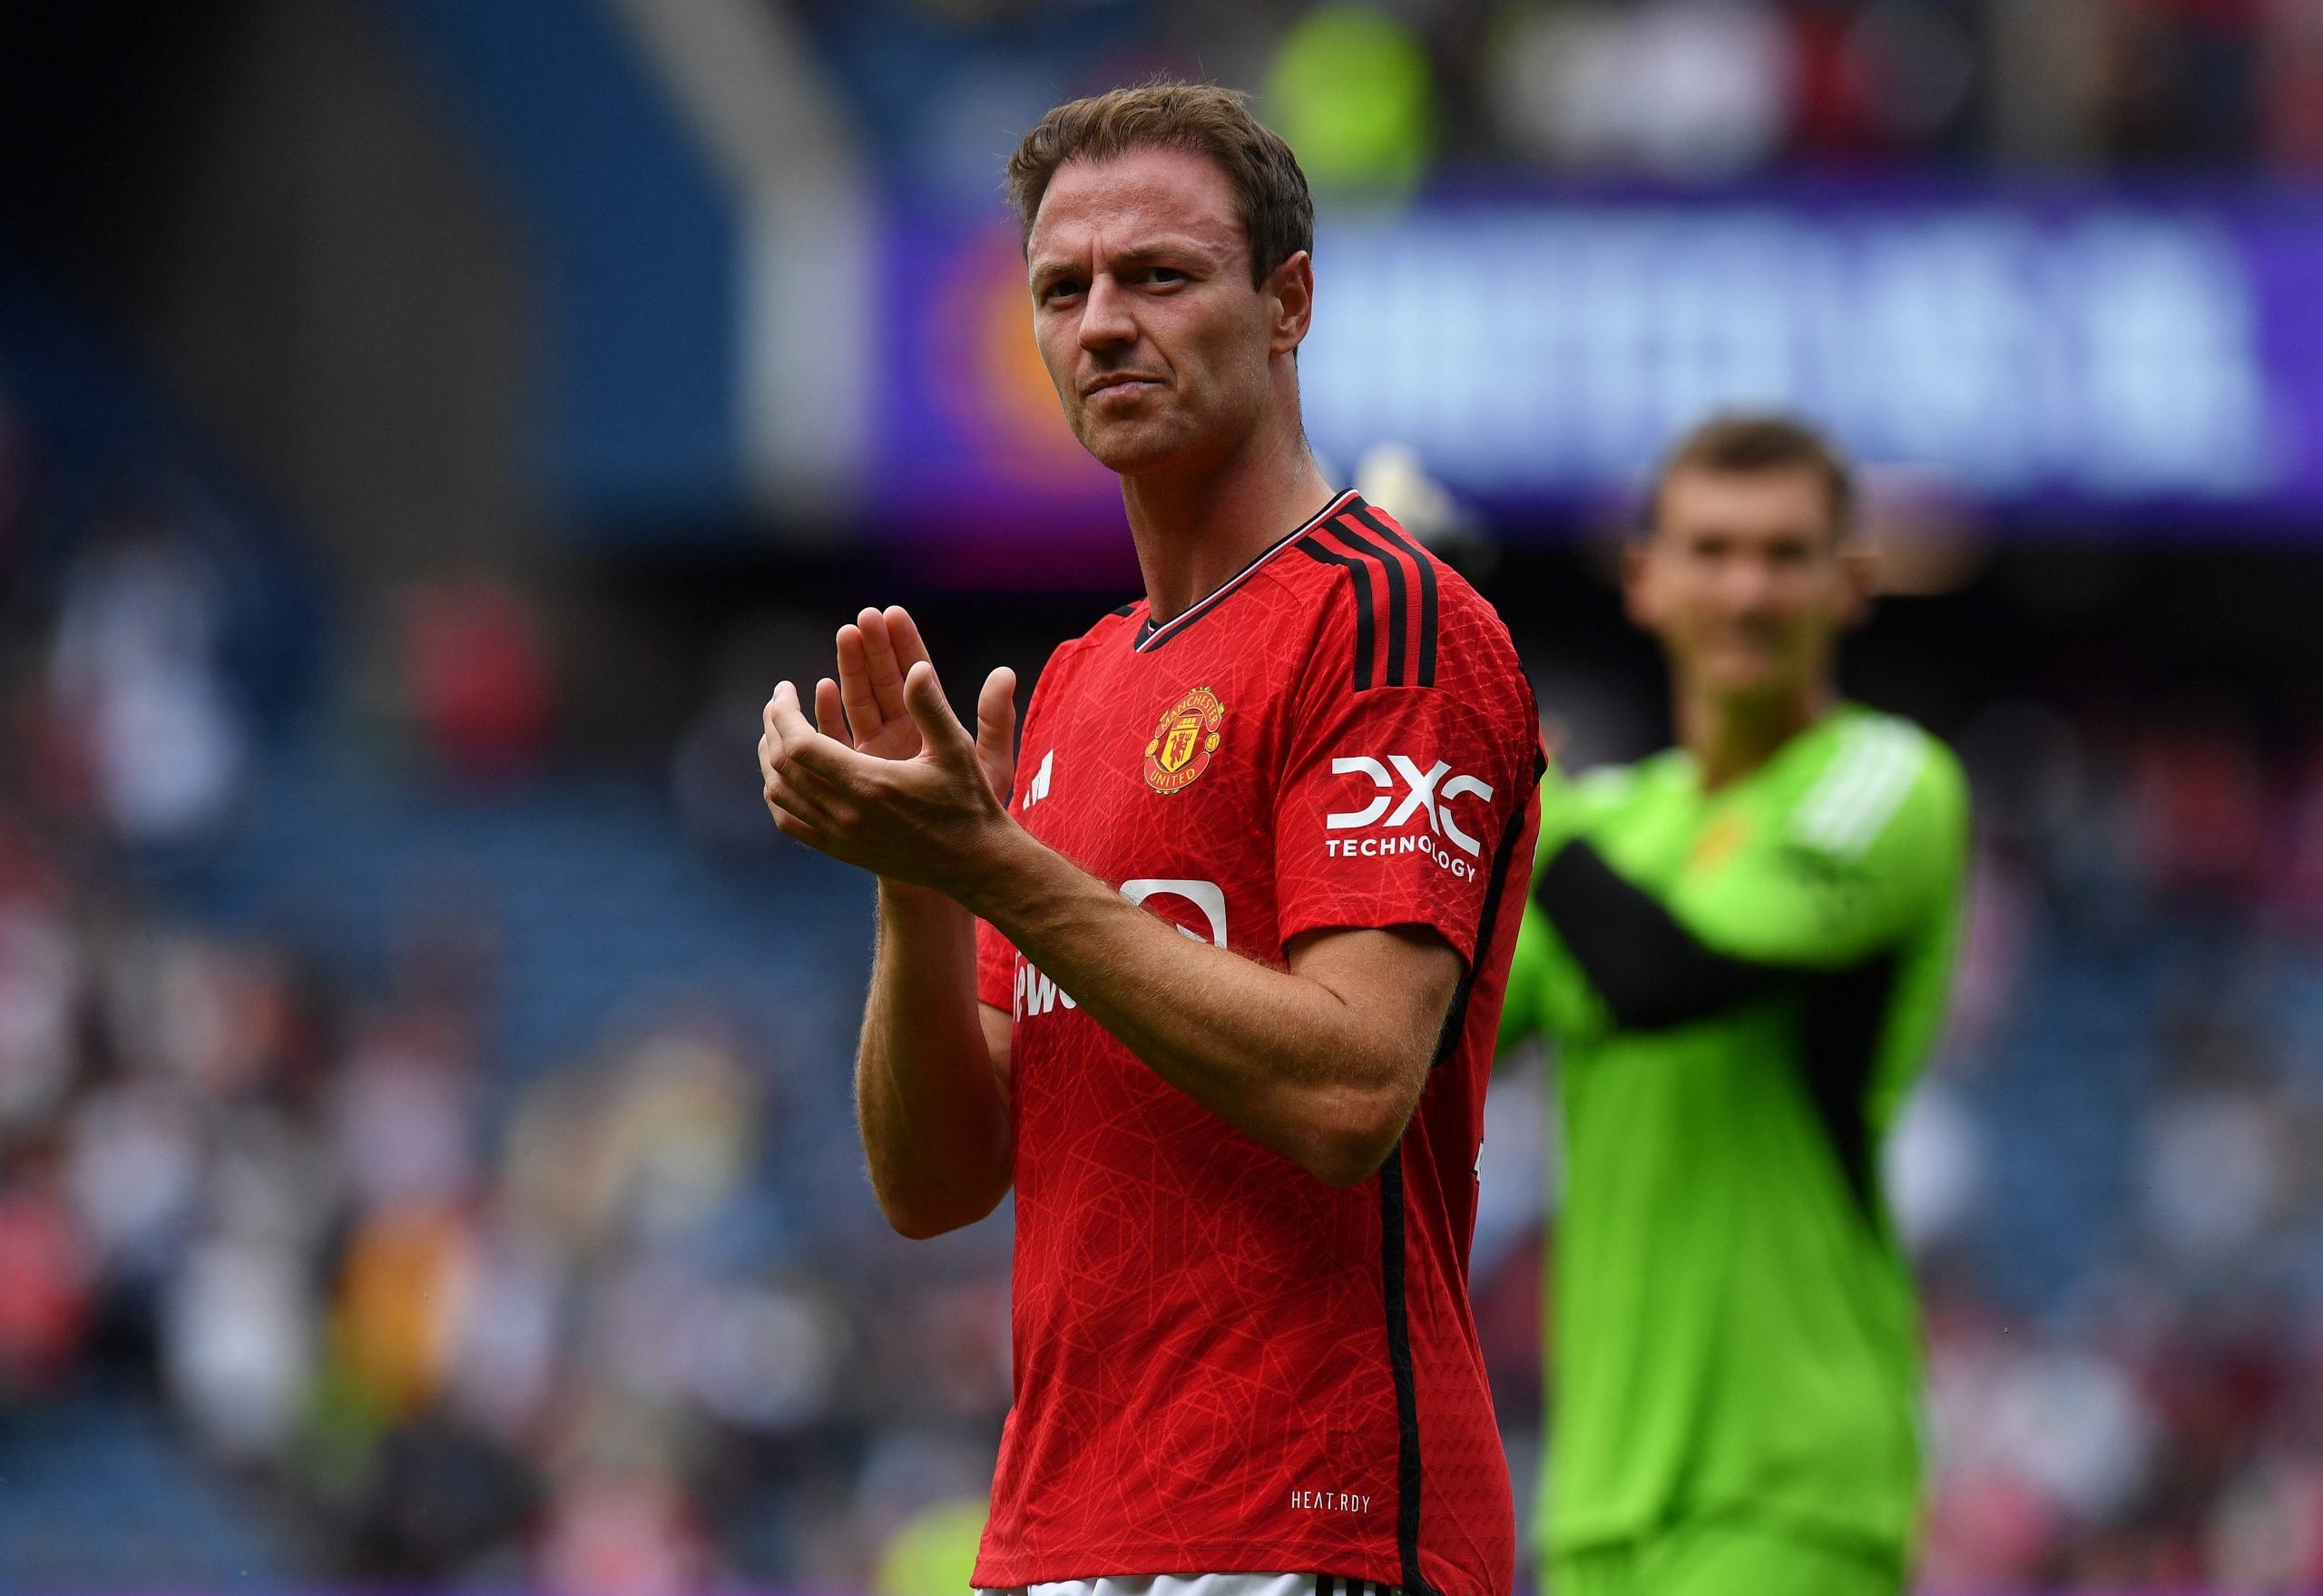 EDINBURGH, SCOTLAND - JULY 19: Jonny Evans of Manchester United applauds the crowd during the pre-season friendly match between Manchester United and Olympique Lyonnais at BT Murrayfield Stadium on July 19, 2023 in Edinburgh, Scotland. (Photo by Mark Runnacles/Getty Images)